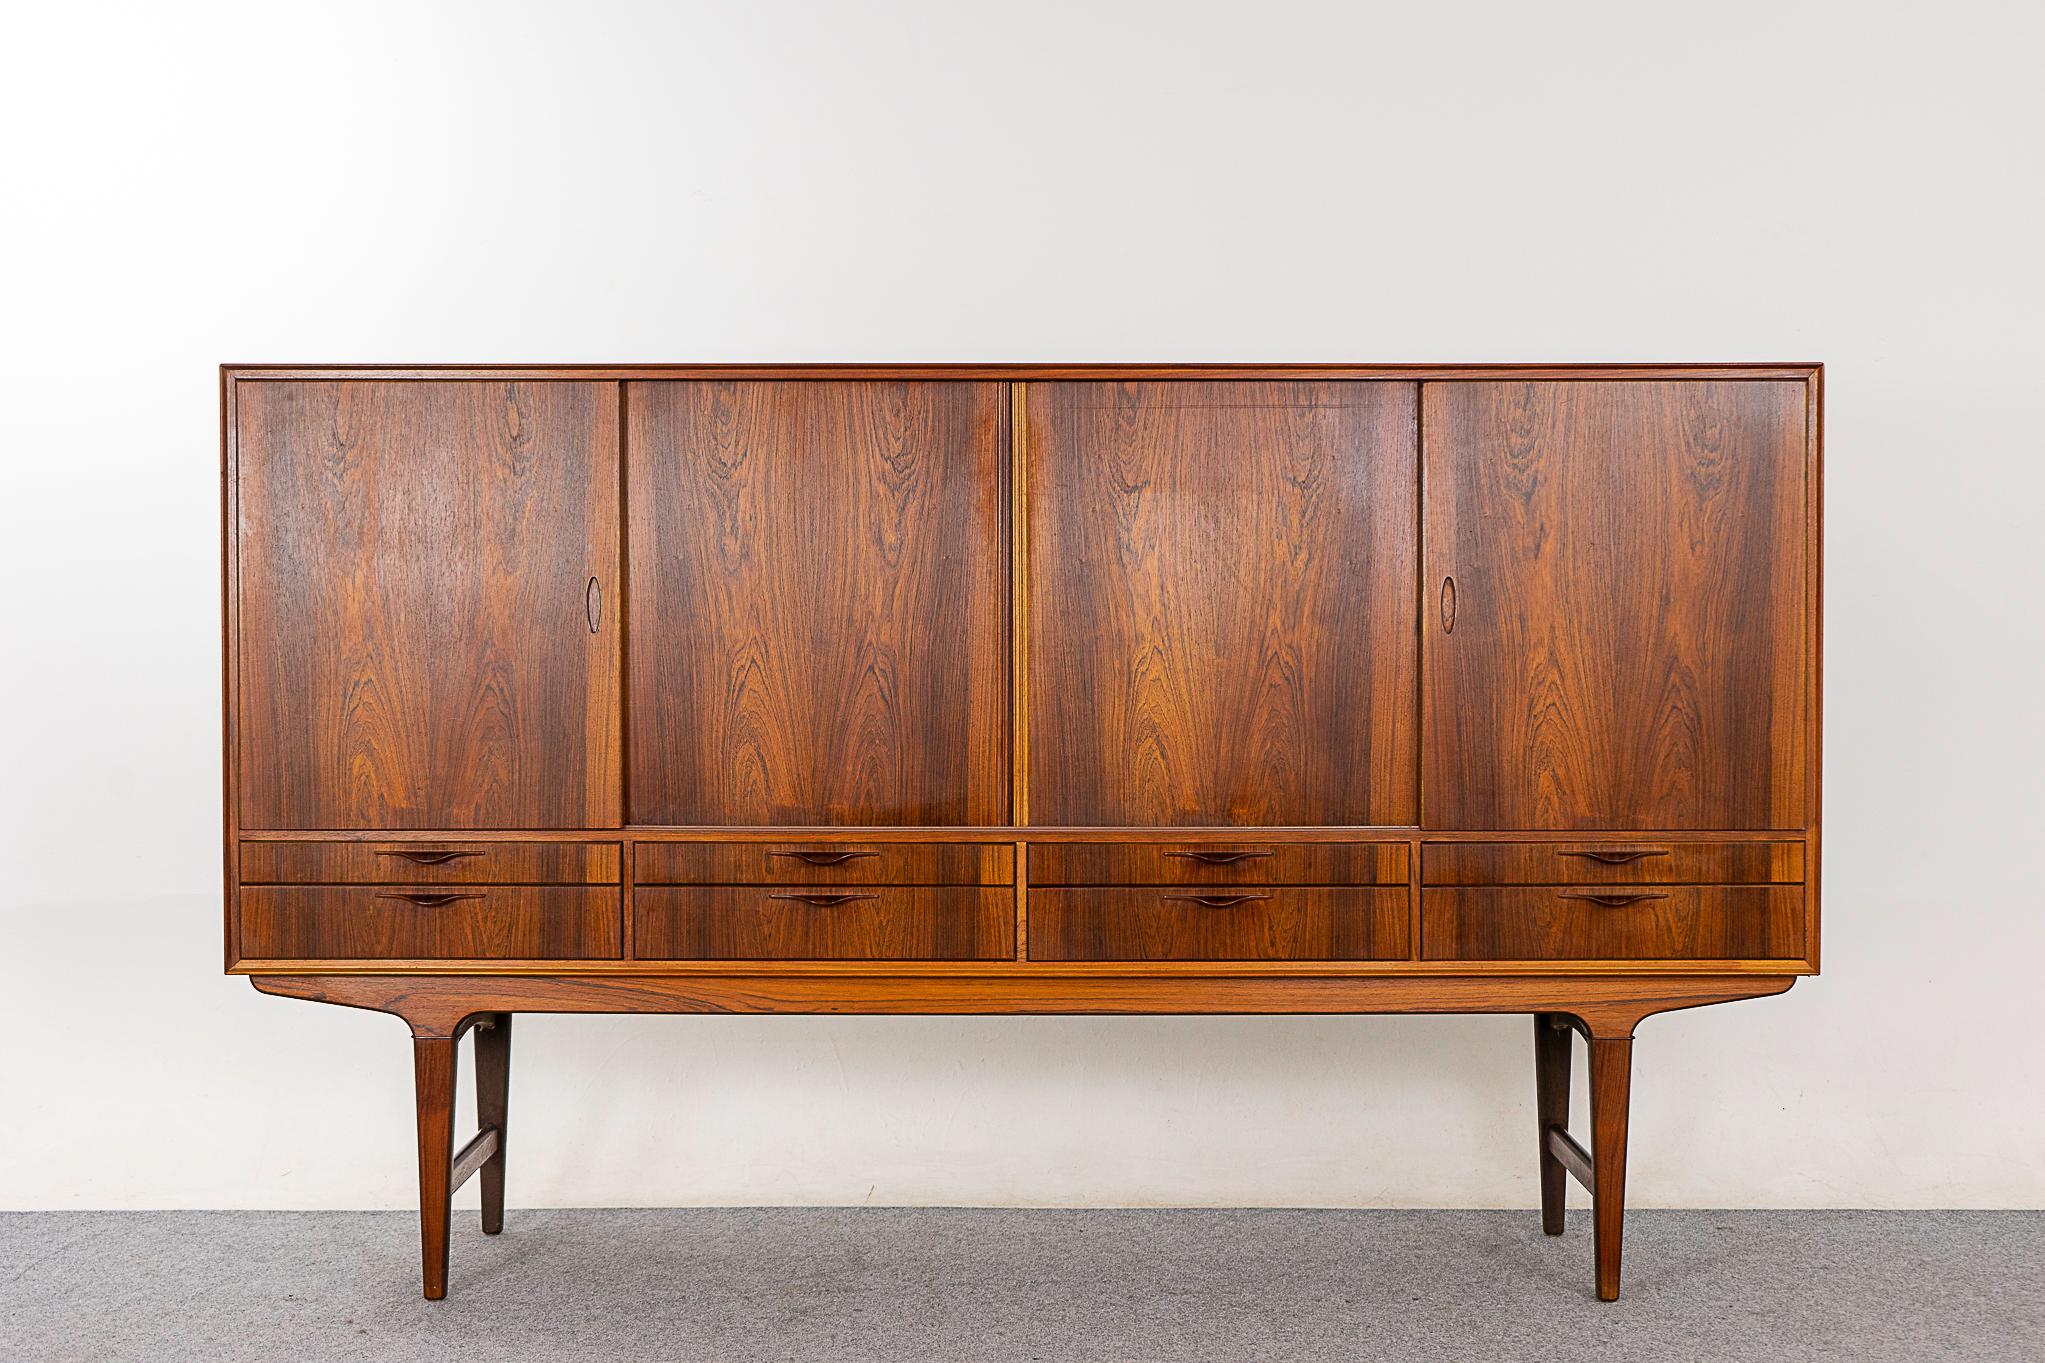 Rosewood mid-century sideboard, circa 1960's. Stunning grain patterns on the veneered case, doors and drawers. Angular base, lipped finger pulls, adjustable shelving, interior drawers and elegant cross supports. Storage for days, with style!